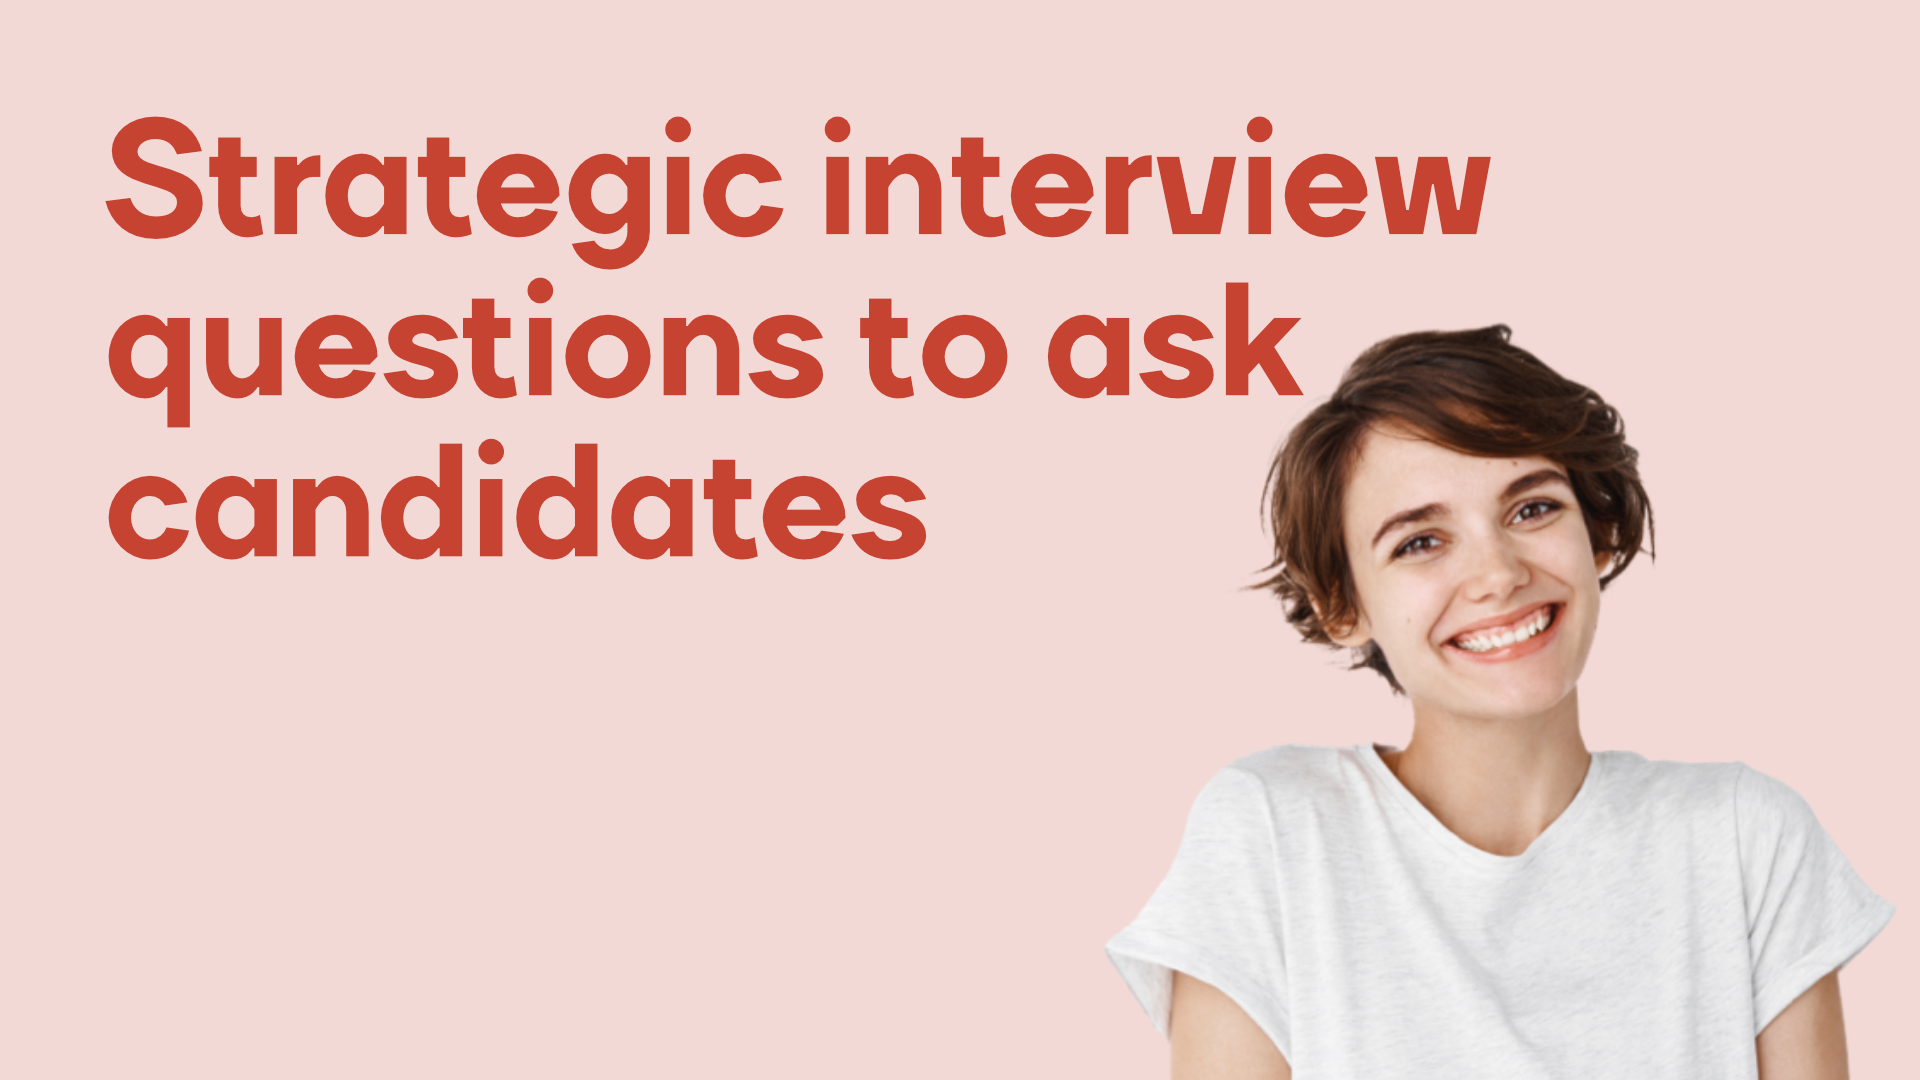 Strategic interview questions to ask candidates